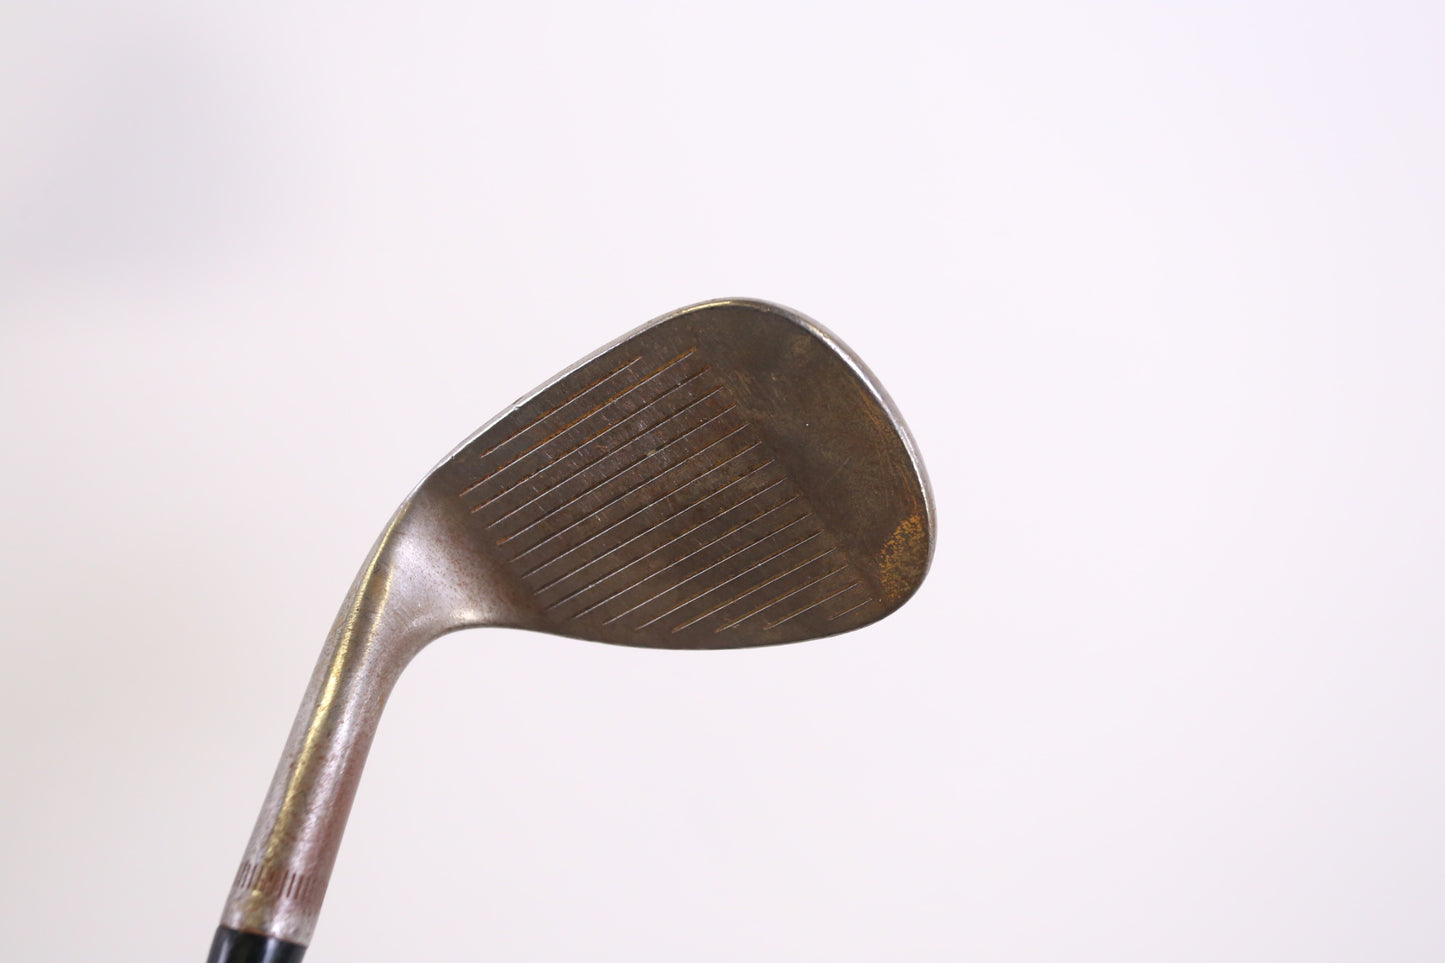 Used Callaway MD4 Chrome C Grind Lob Wedge - Right-Handed - 58 Degrees - Stiff Flex-Next Round